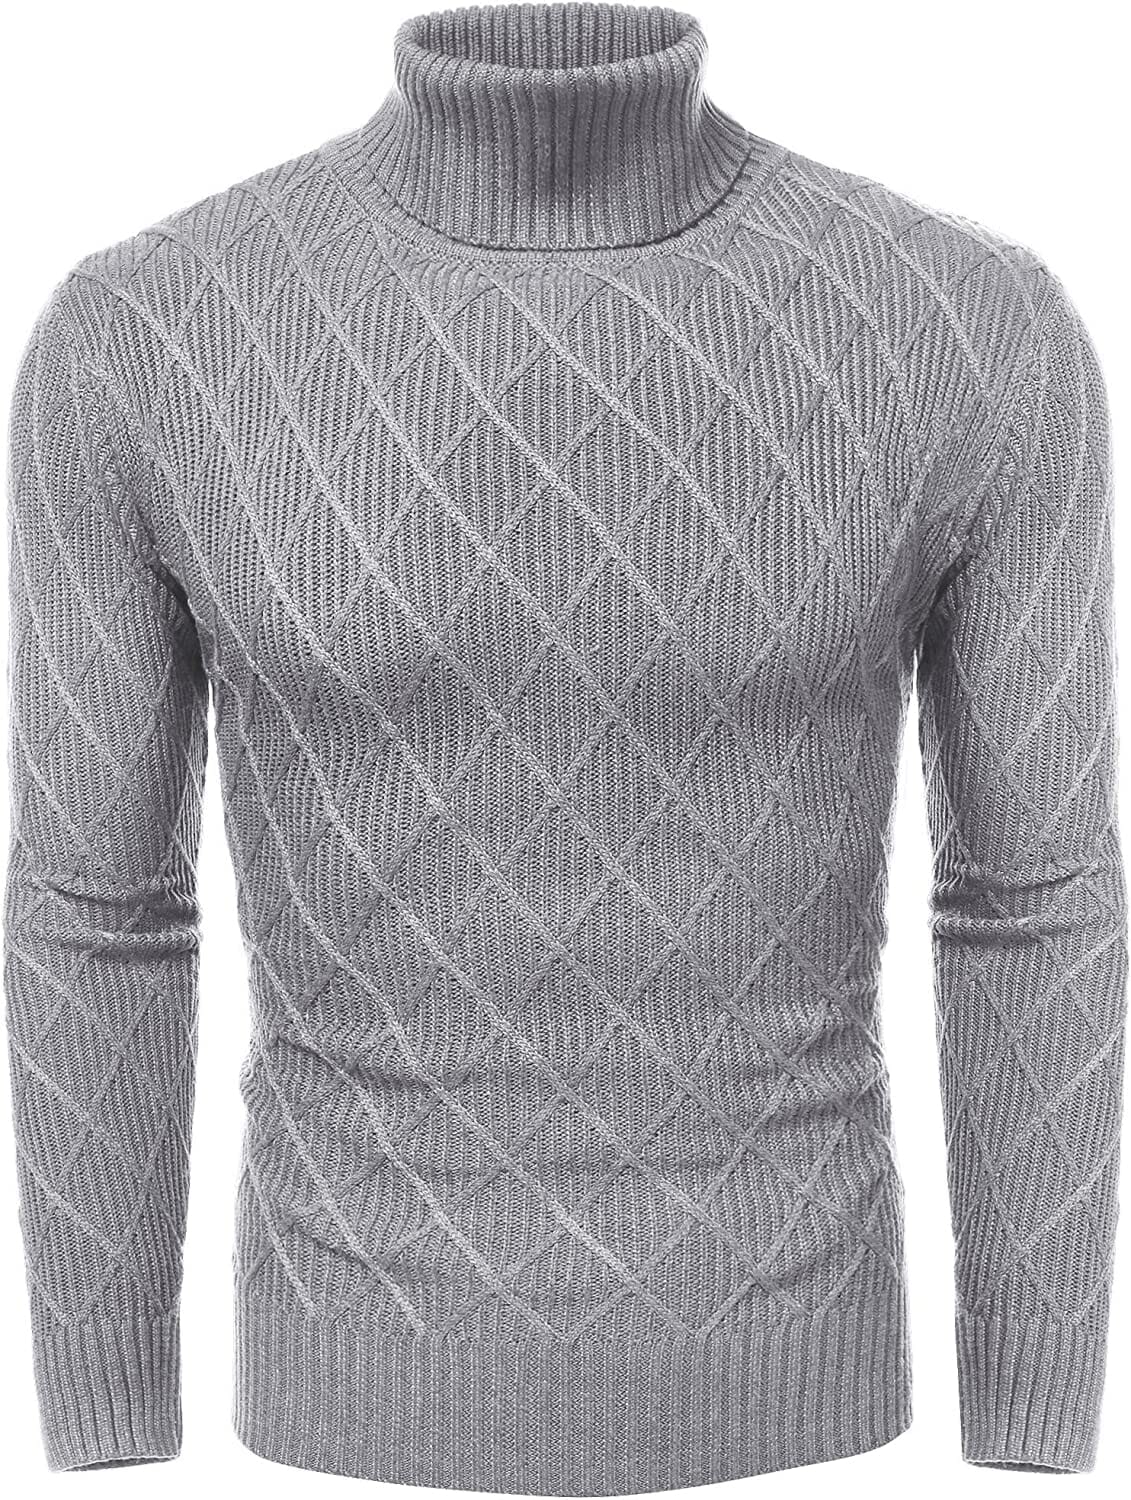 Slim Fit Thick Cotton Pullover Turtleneck Sweaters (US Only) Sweaters COOFANDY Store Grey S 